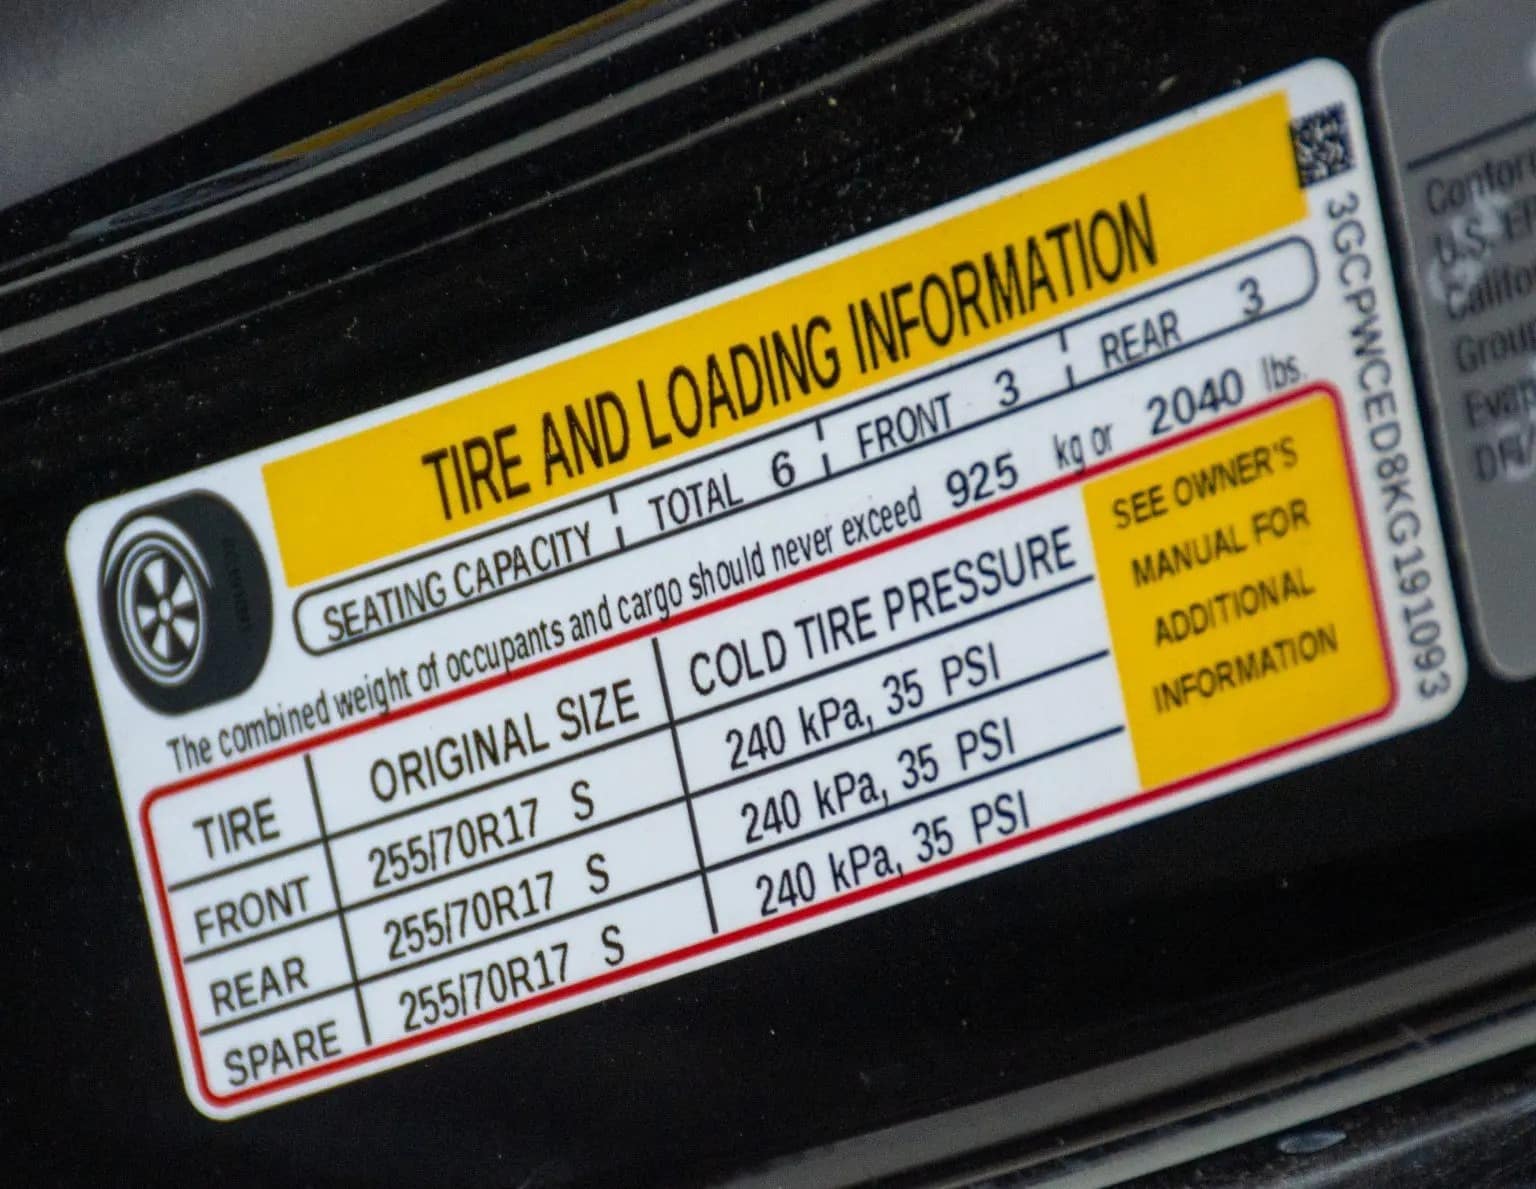 Tire and Loading information chart.